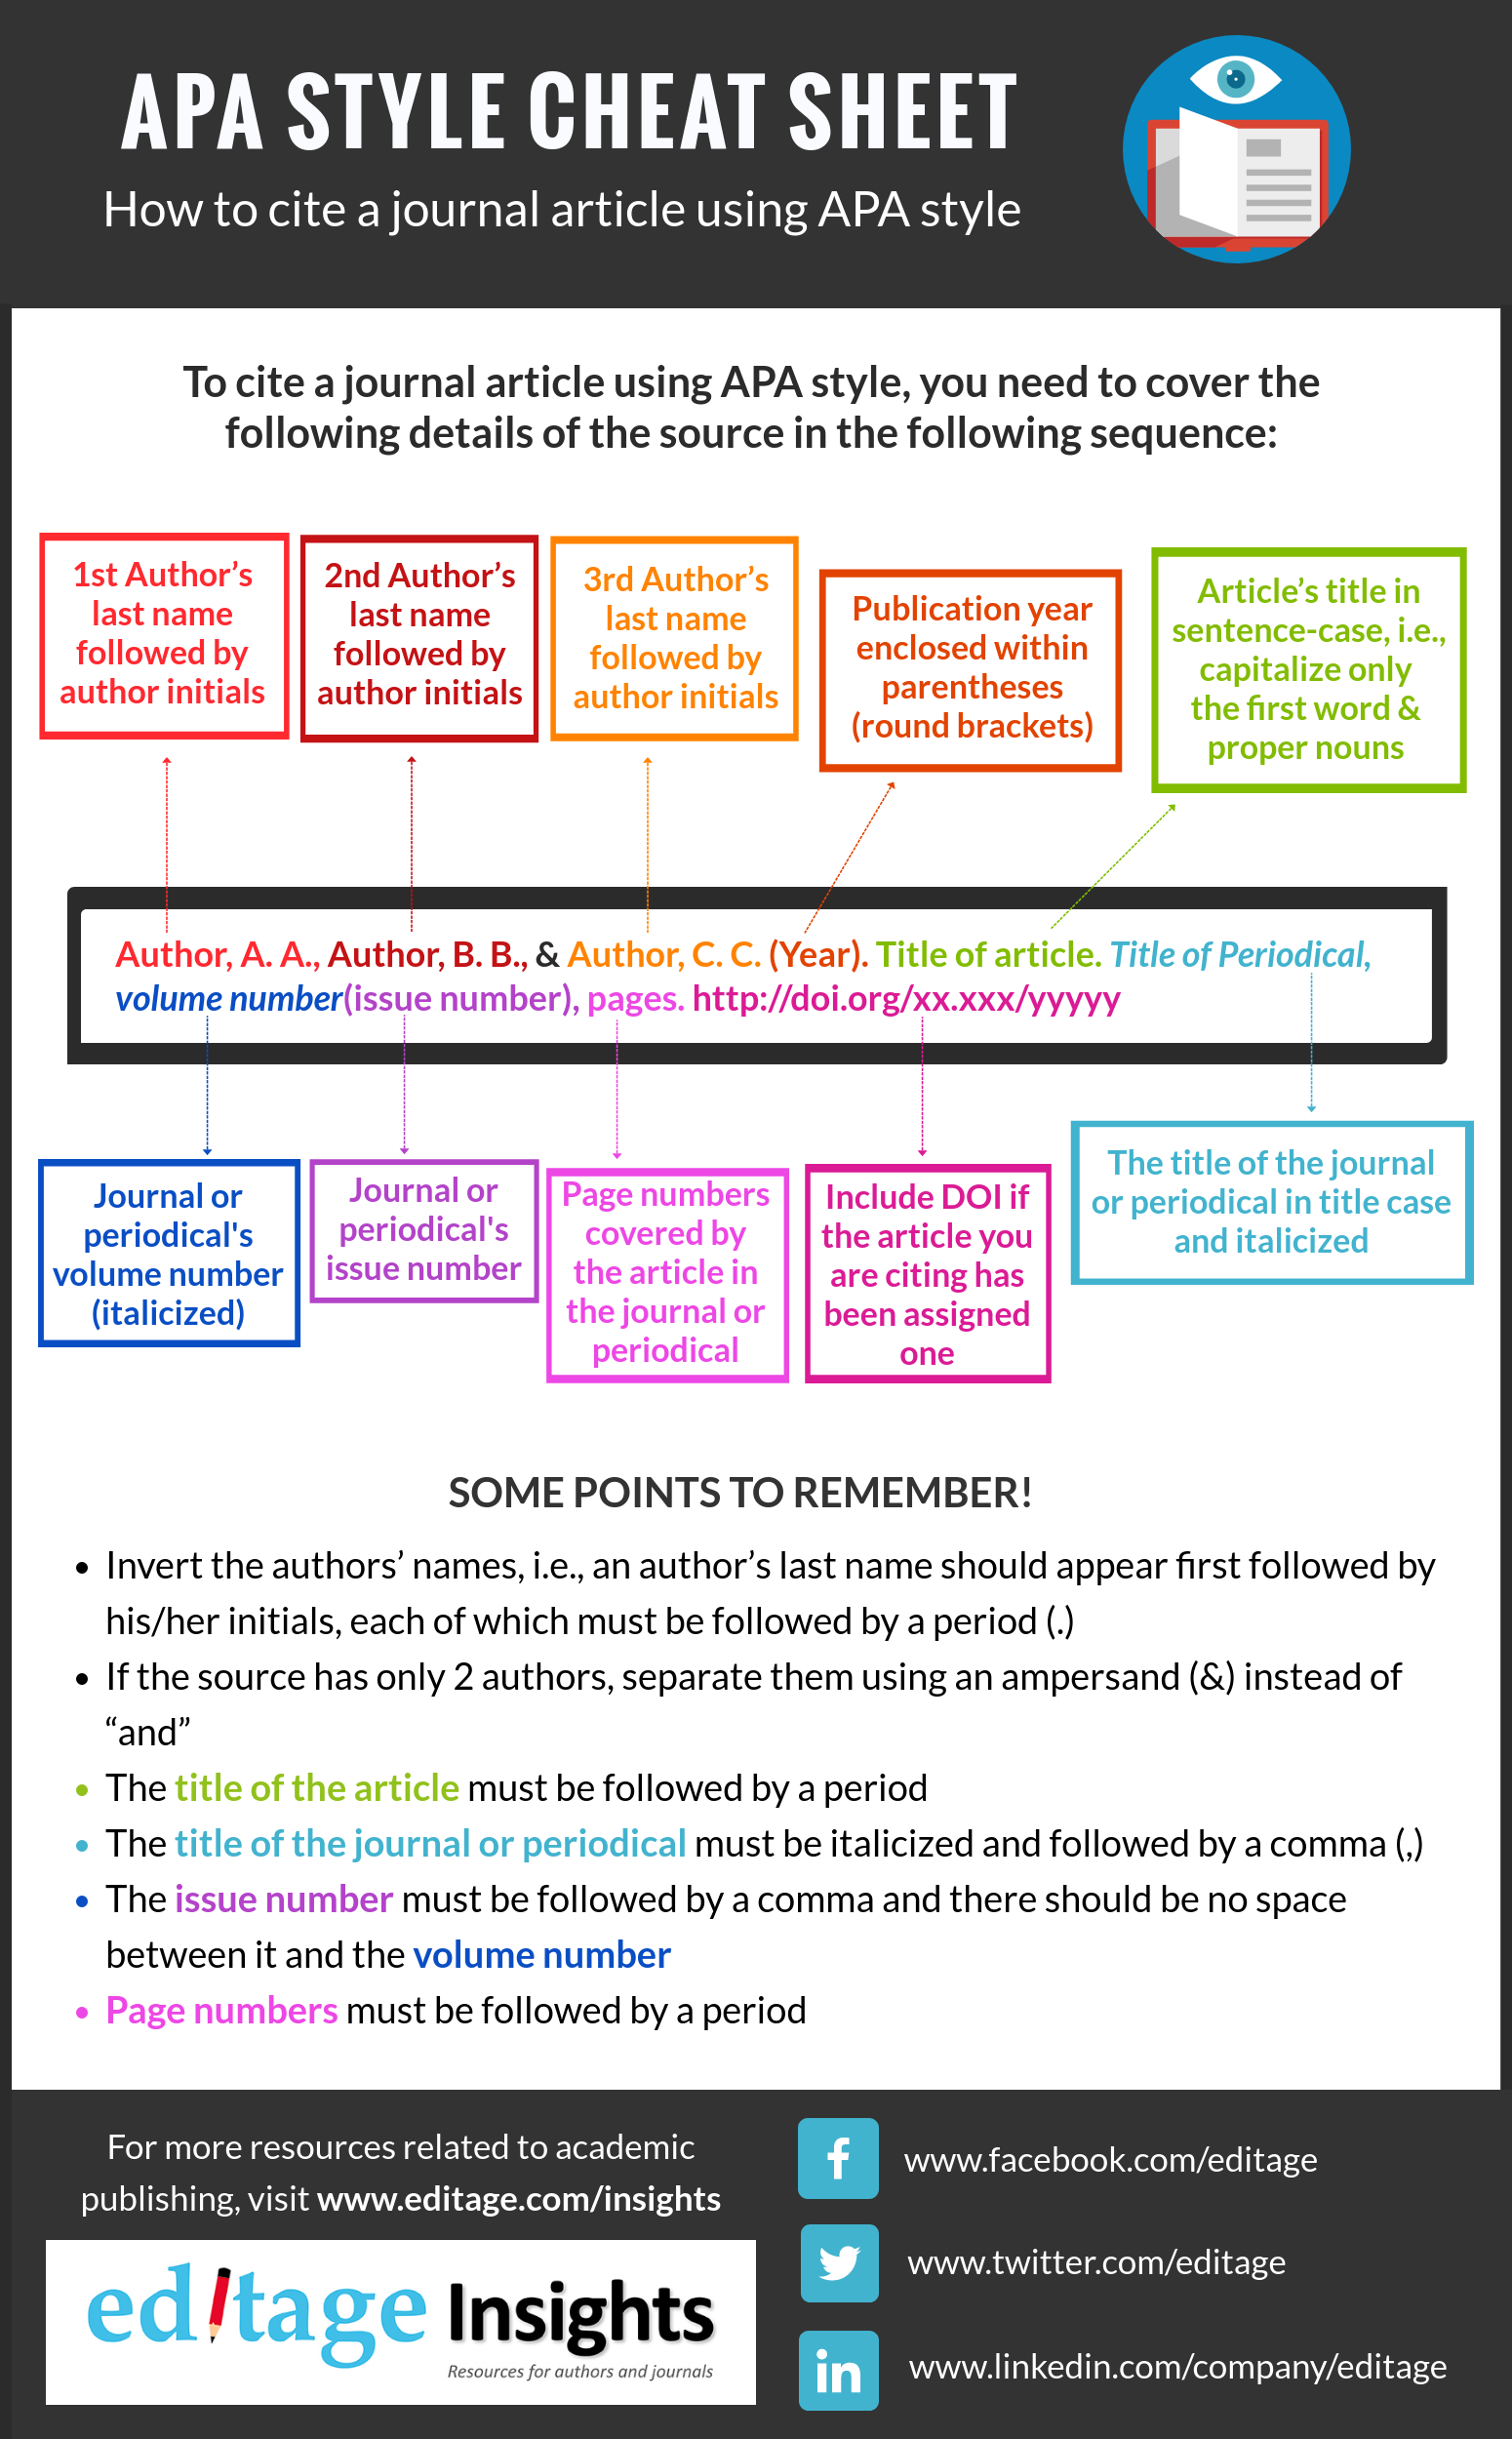 Cite a journal article using APA Style Cheatsheet [Infographic]